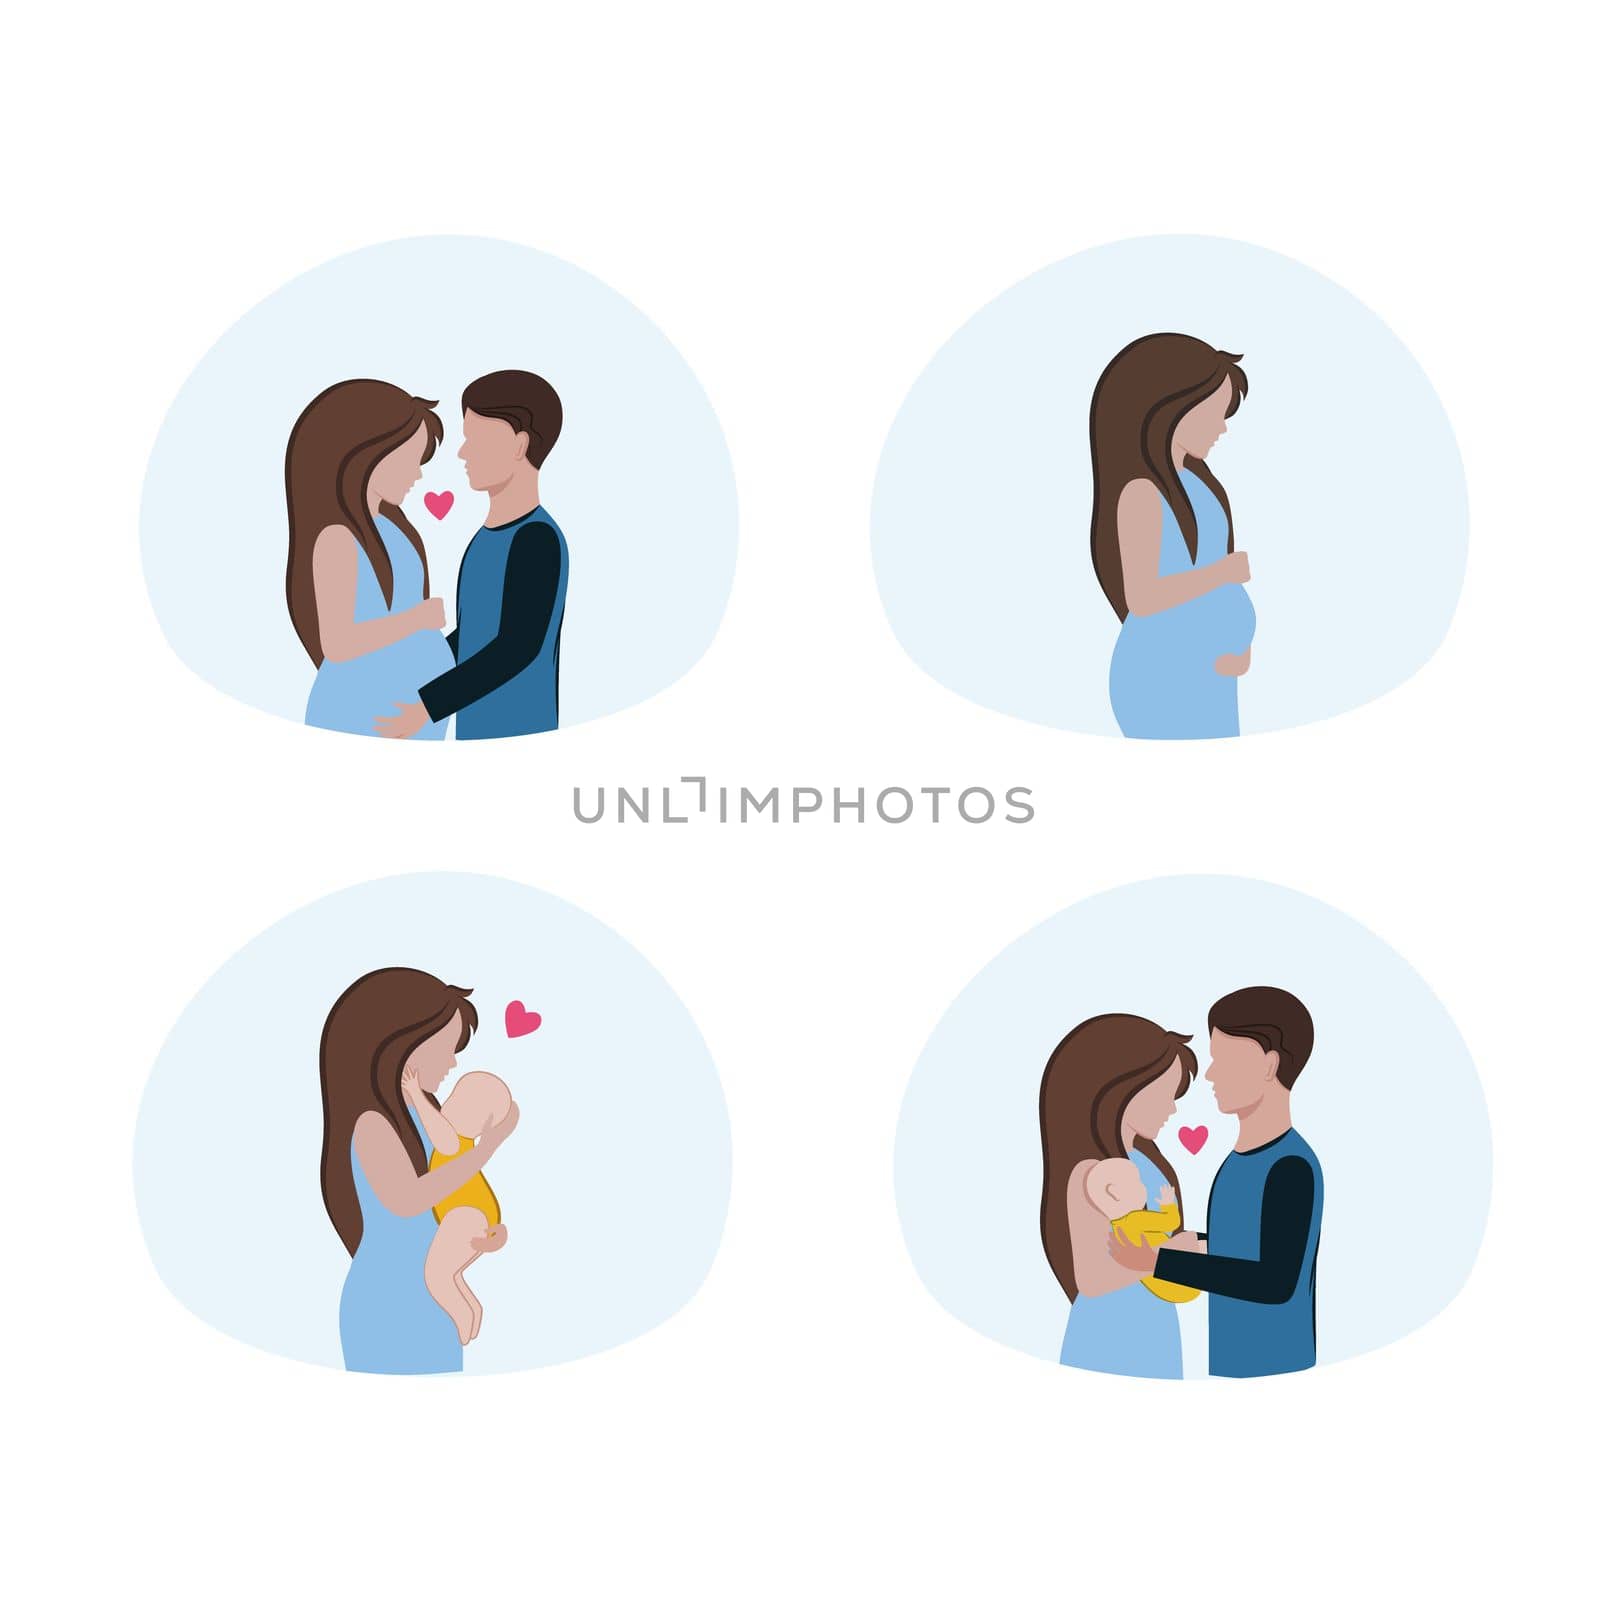 A set of vector images on the theme of happy relationships, motherhood, pregnancy and fatherhood. A young family plays with a newborn child. A pregnant woman and her husband. by polinka_art